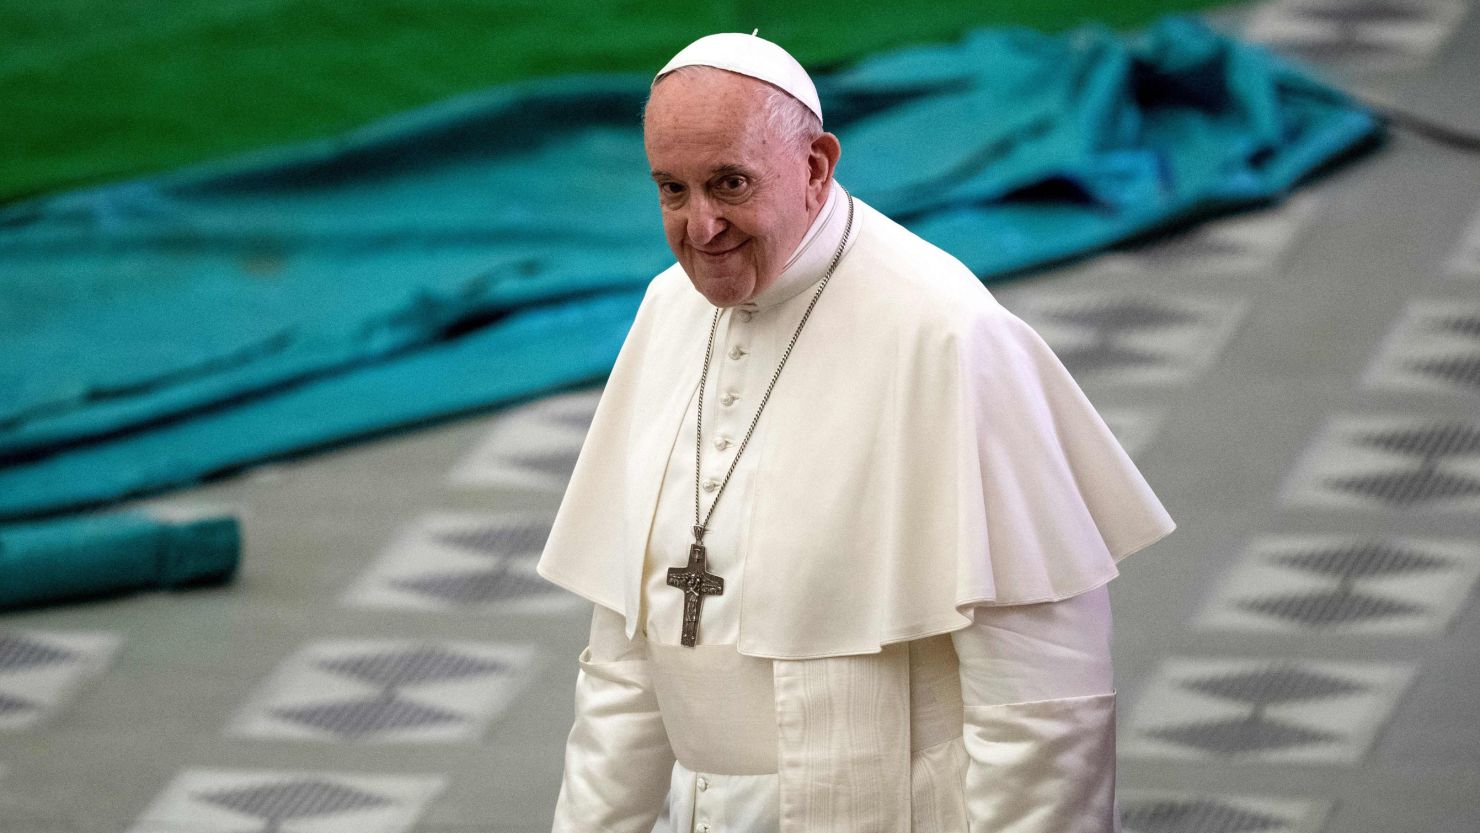 What Pope Francis and the Vatican now say about same-sex unions